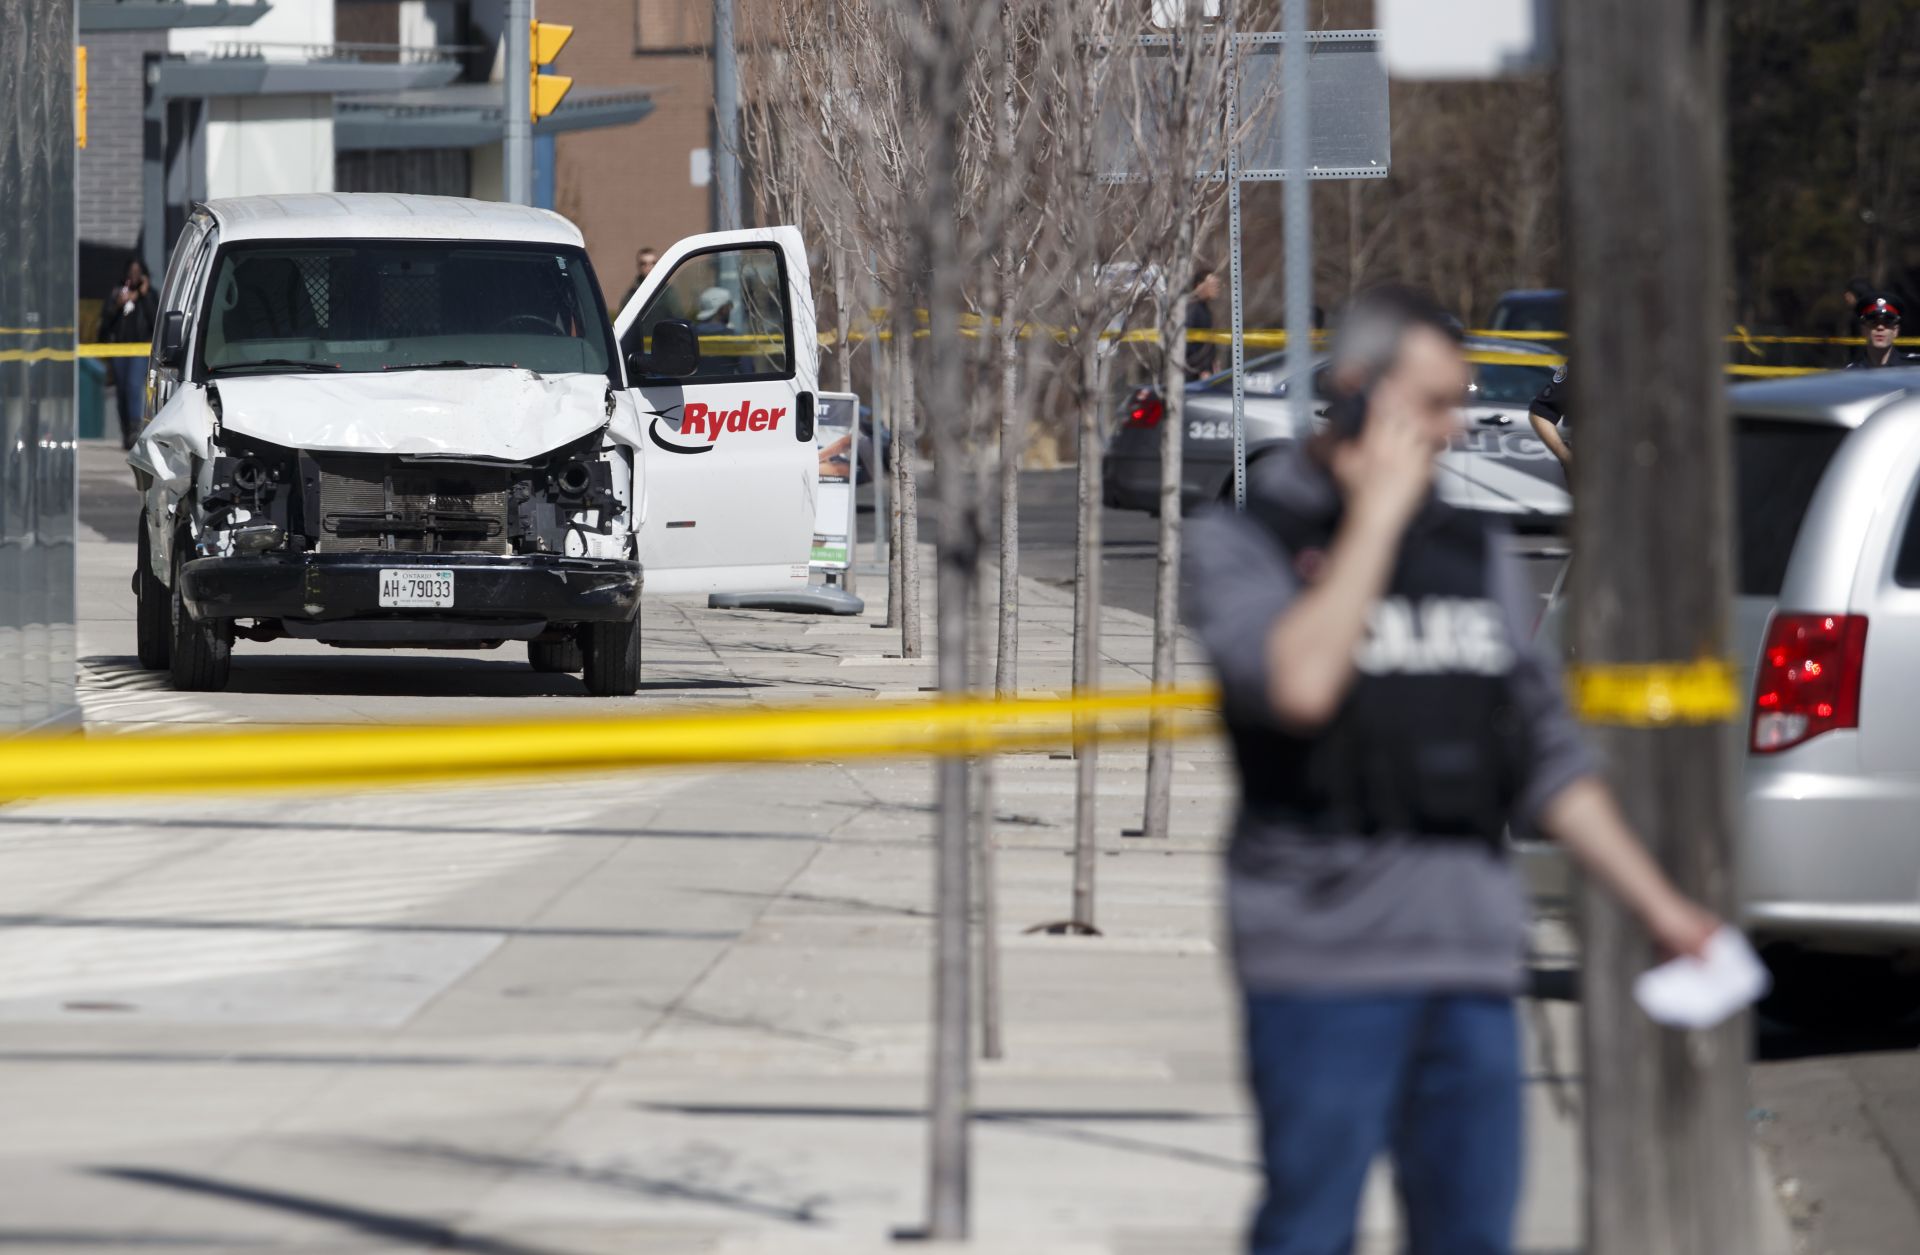 This photo shows the van that Alek Minassian, 25, reputedly drove down a street in Toronto, Canada, on April 23, 2018. 